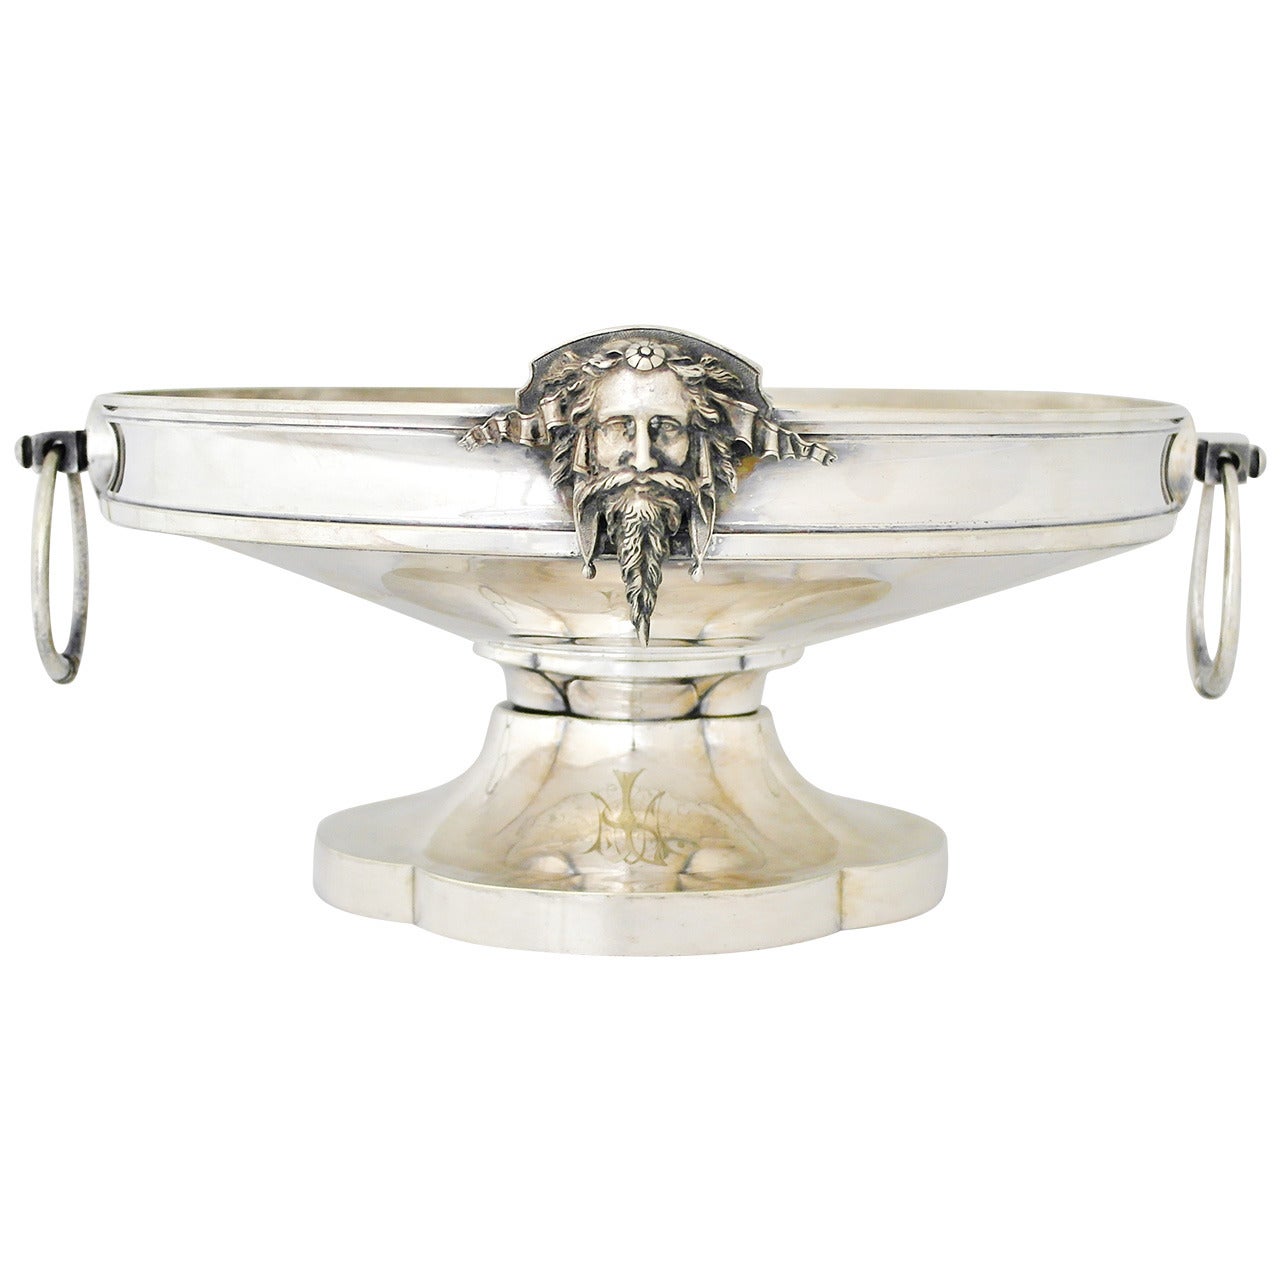 Monumental Gorham Silver Centerpiece with Loop Handles 1871 For Sale